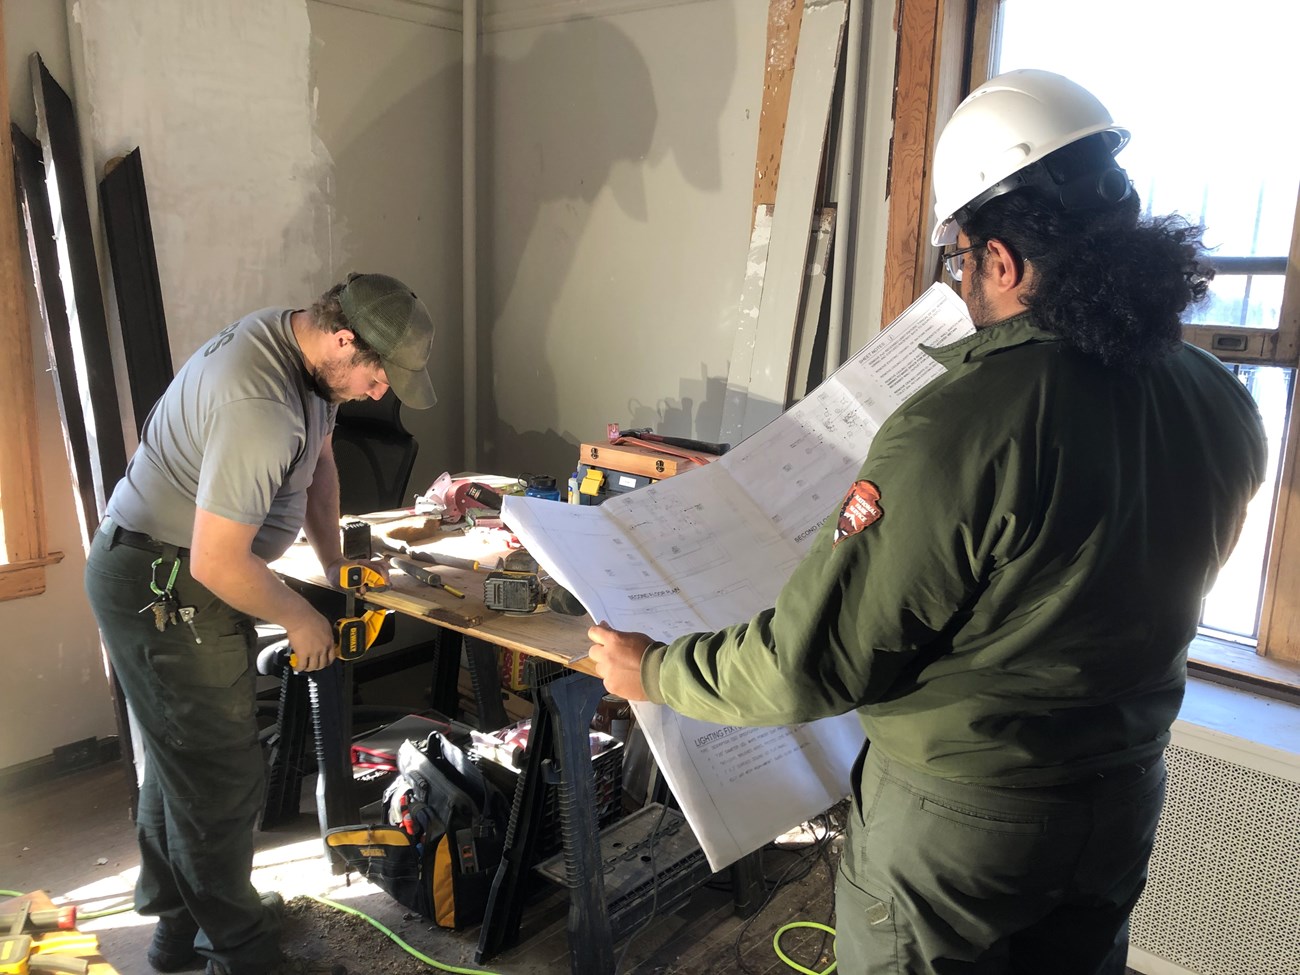 A park ranger in maintenance work clothing works with tools in a room under construction as another ranger in a hard hat consults blueprints